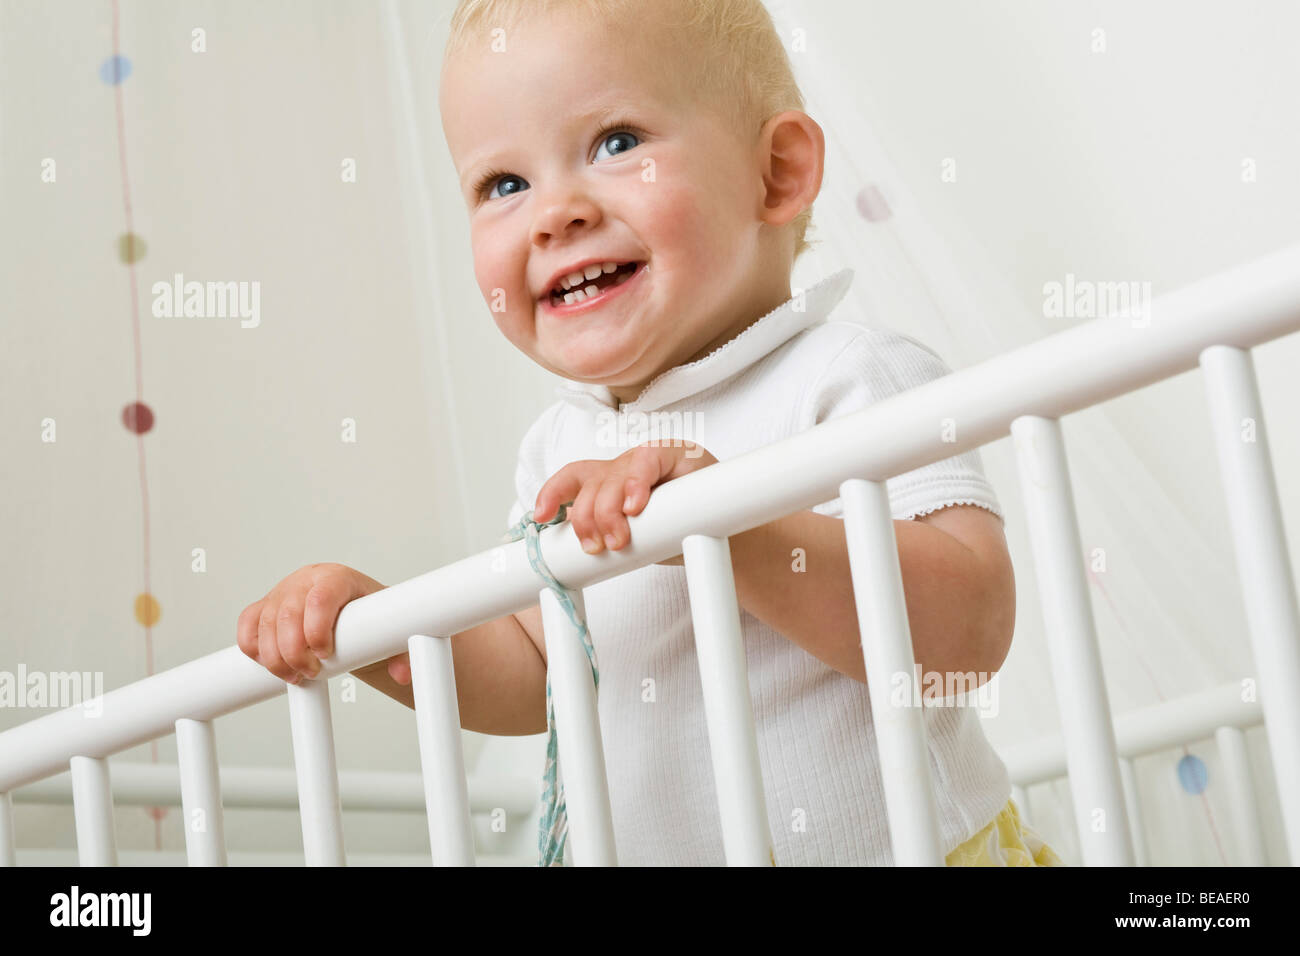 A toddler standing in a baby crib Stock Photo